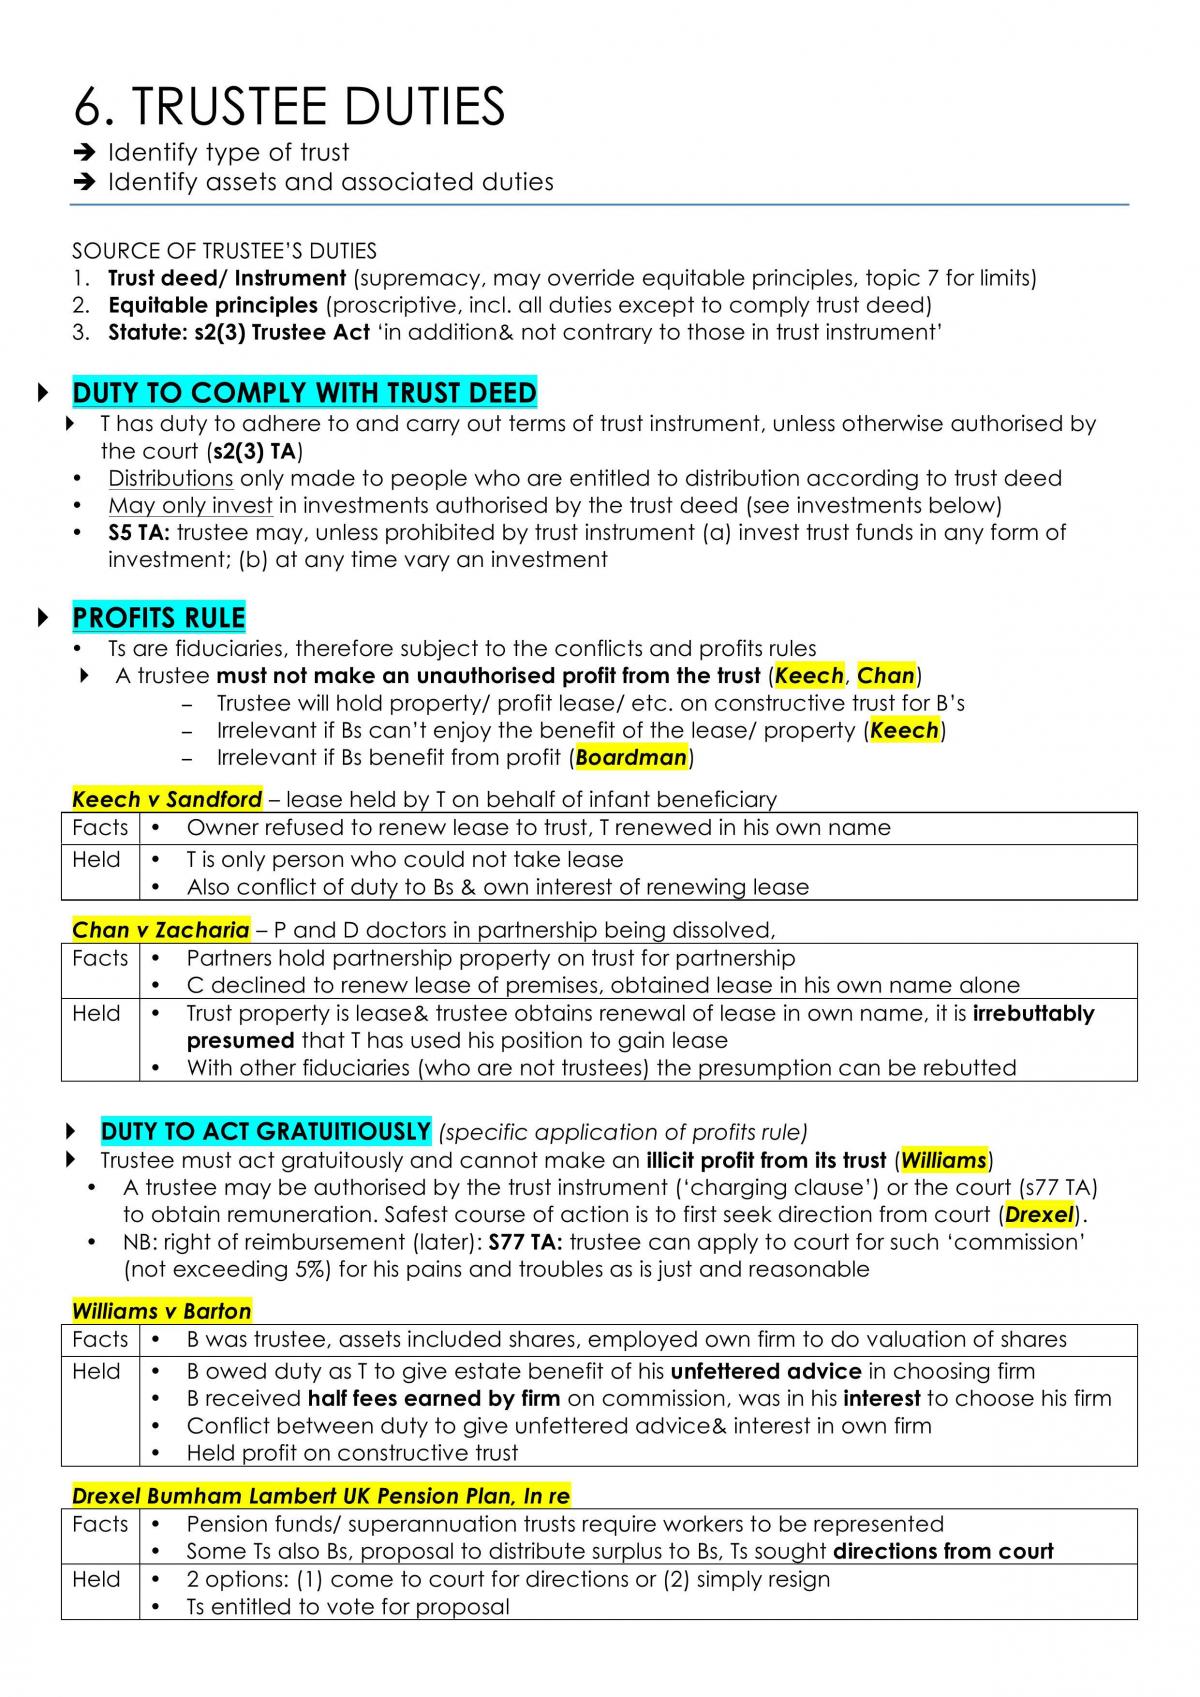 HD LAW4170 Full Exam Notes - Page 29